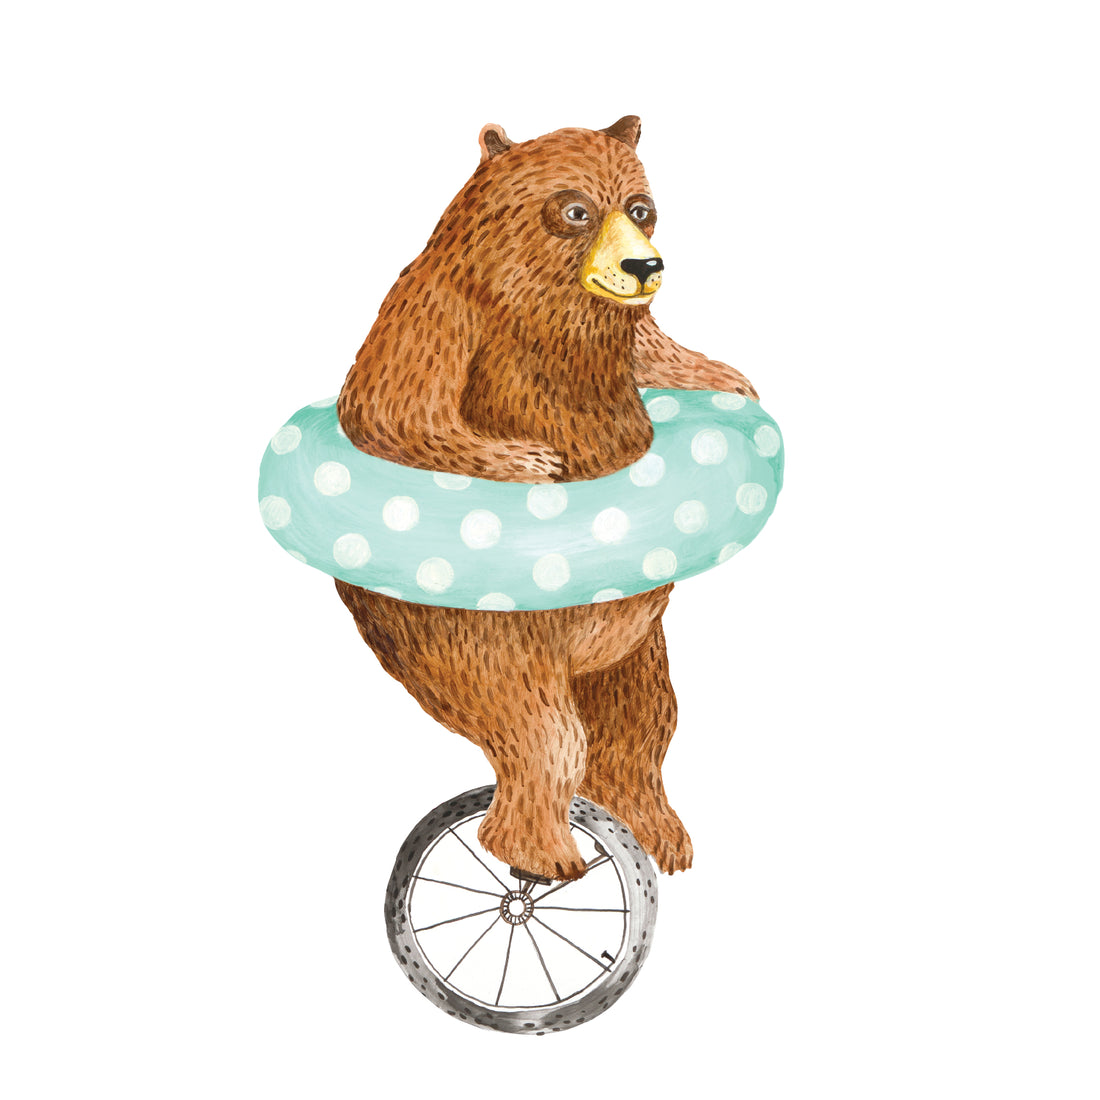 A bear illustrated balancing on a unicycle with a polka-dotted inner tube around its waist, featured as a Nice Wheels Bear Table Accent by Hester &amp; Cook.